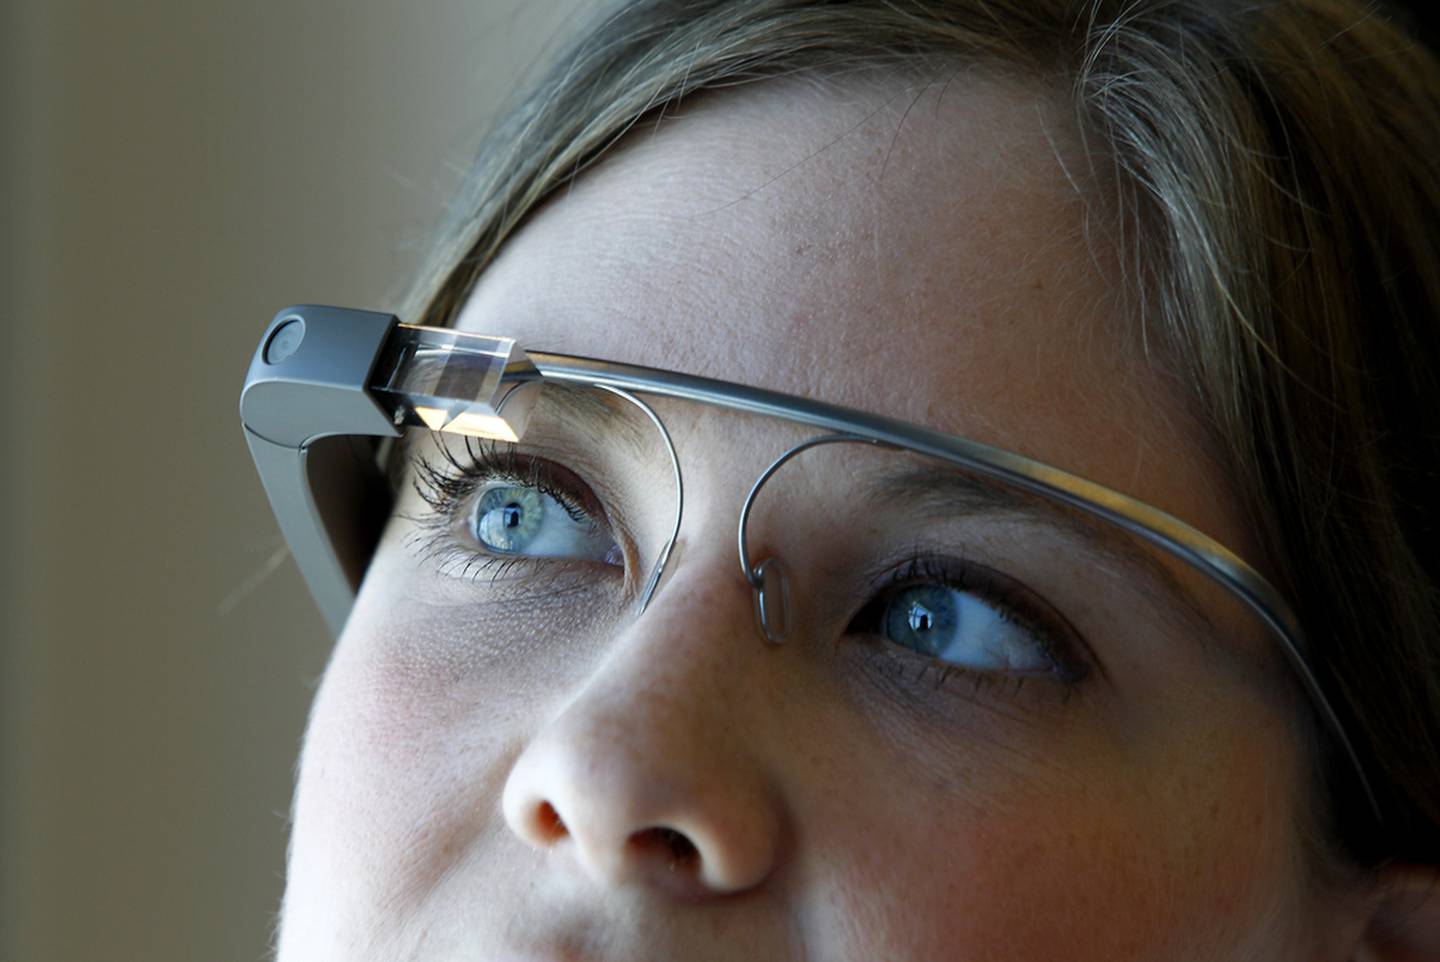 Google Glass was made available to only a few interested users back in 2013 for $1,500. Jeffrey E Biteng / The National